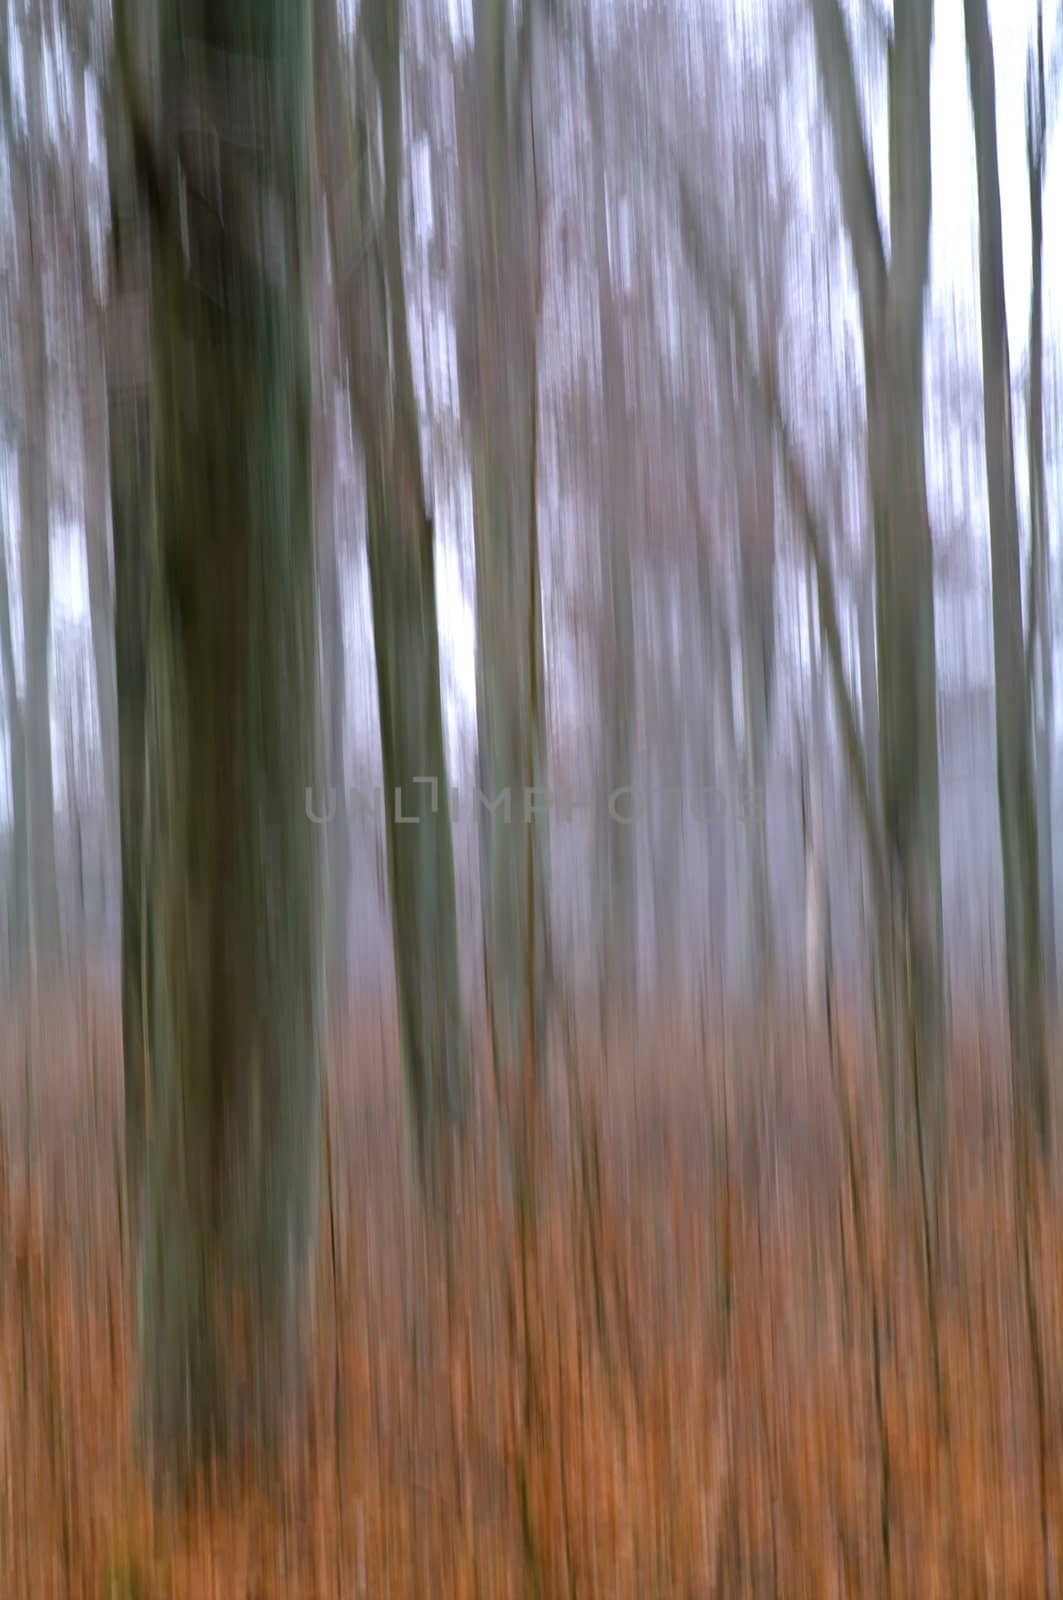 Beech trunks and small beech plants in a forest, movement blur